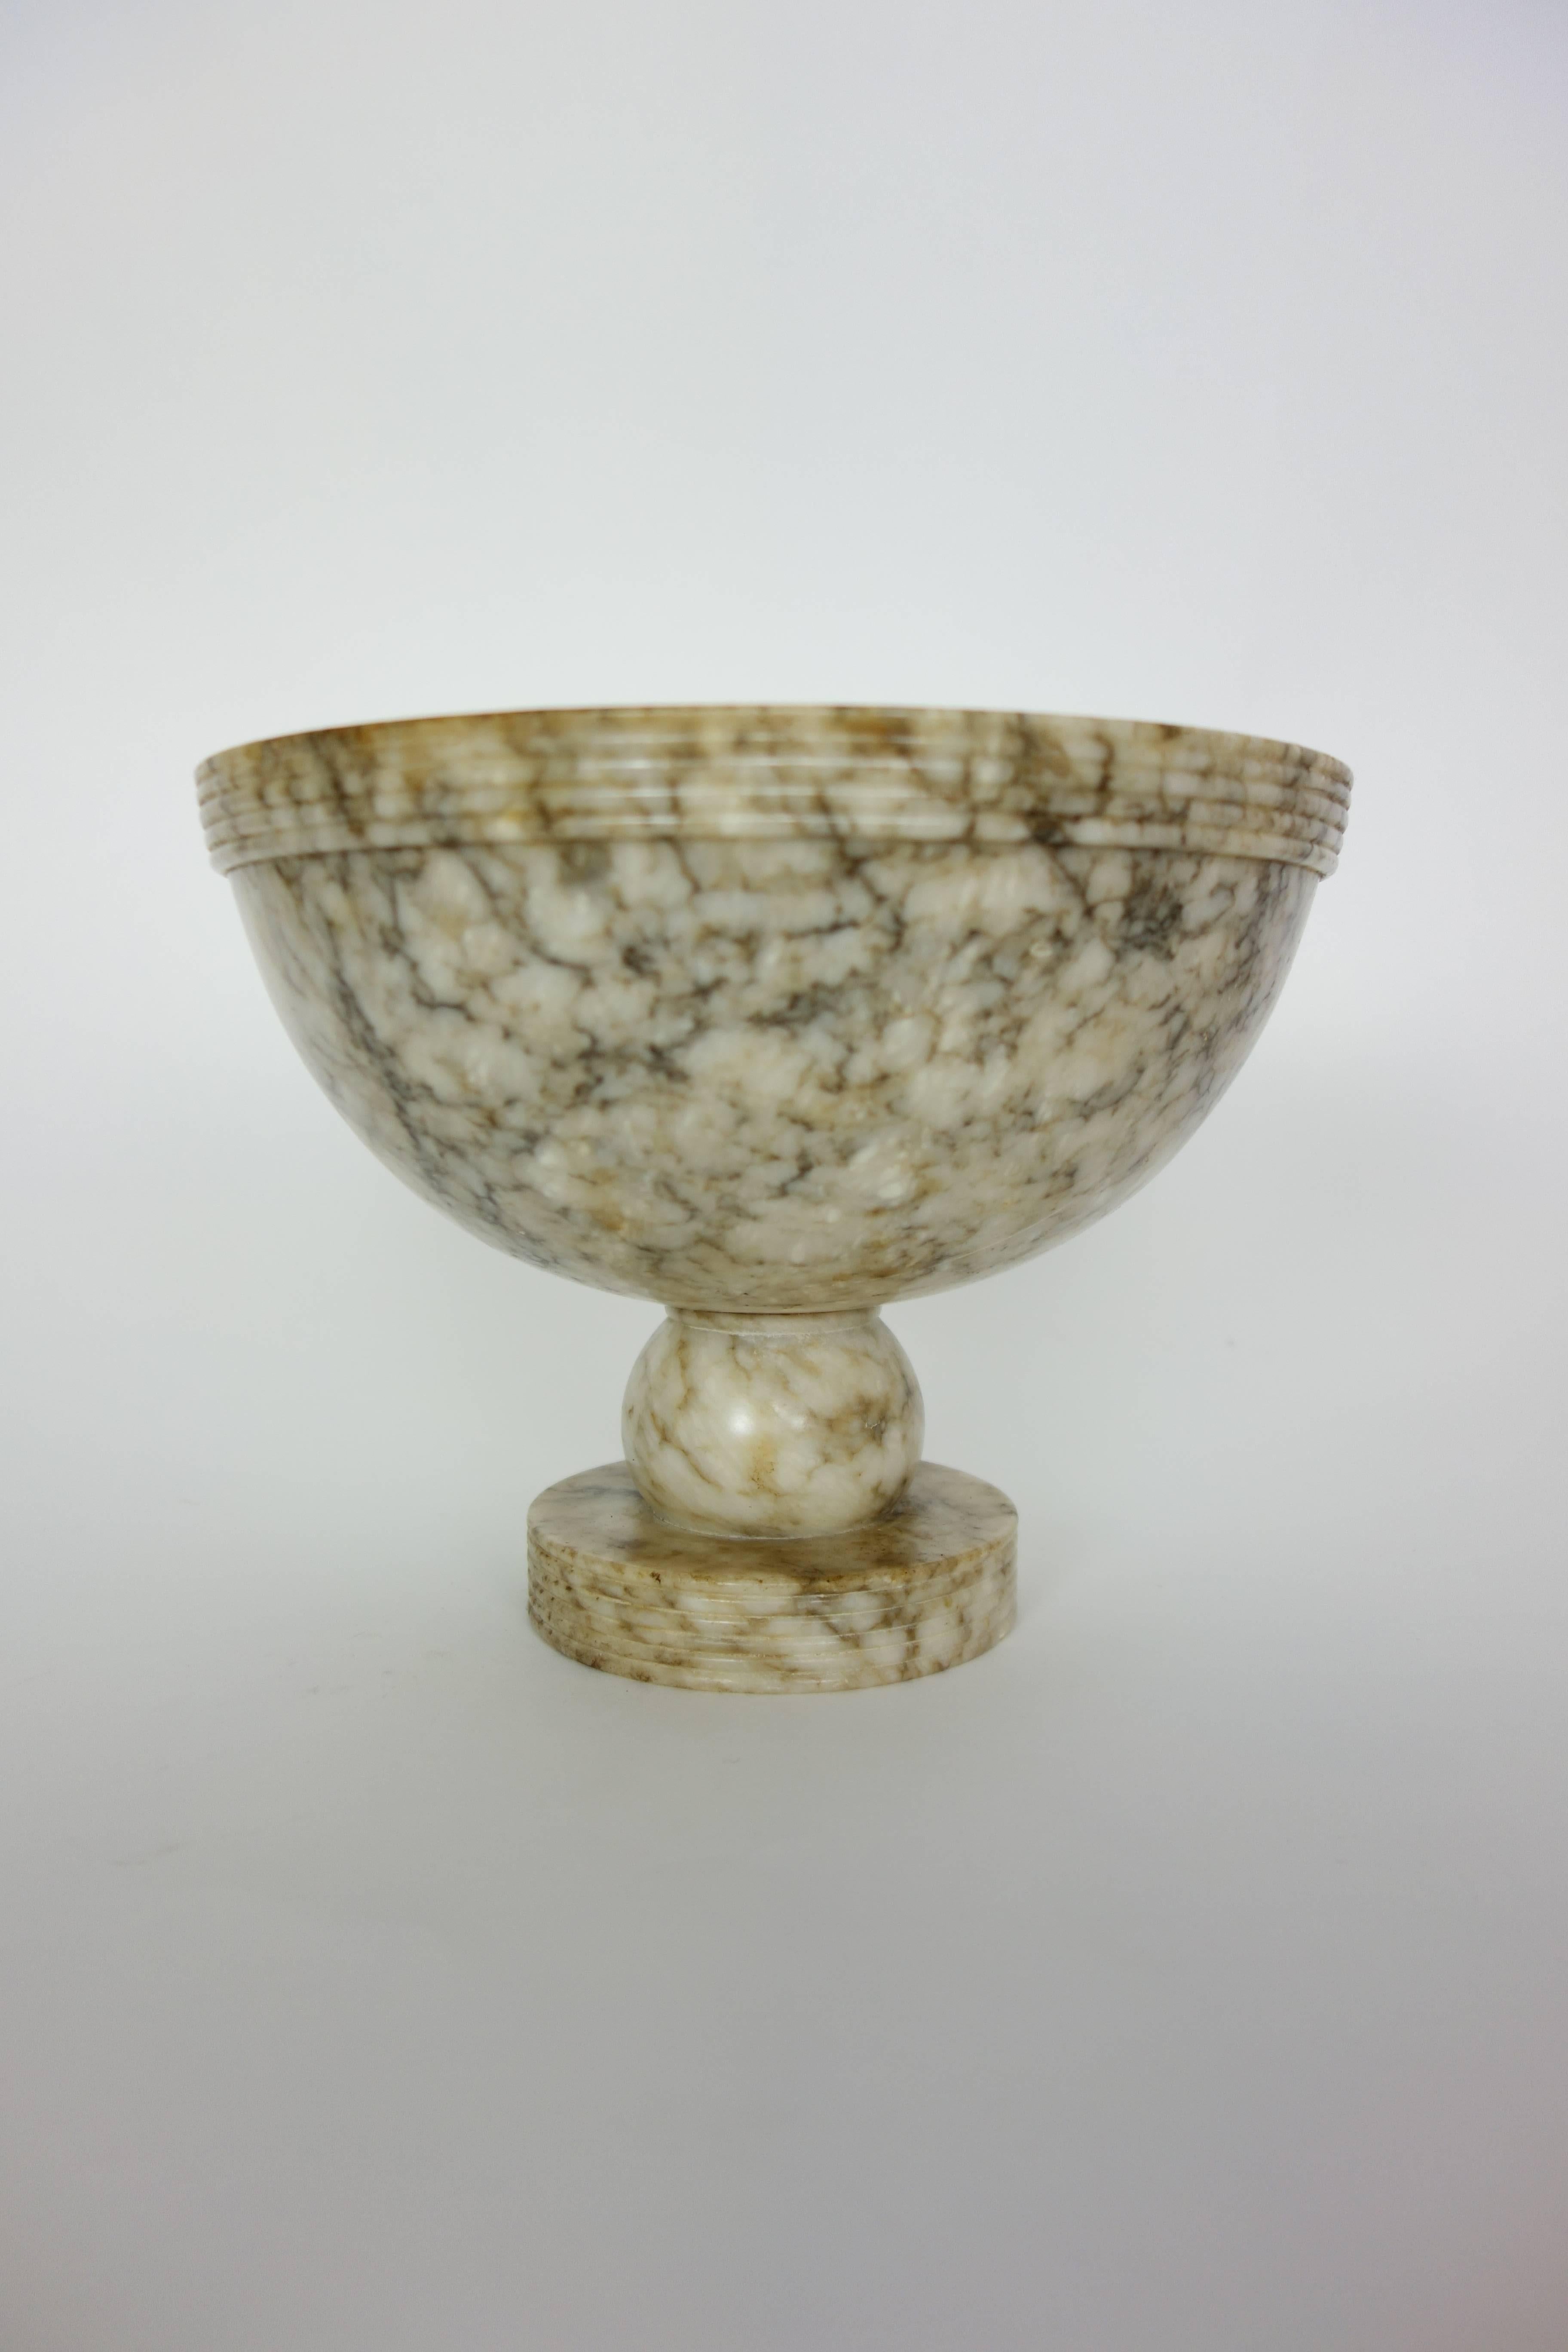 This is a beautiful carved alabaster marble pedestal bowl from Italy.